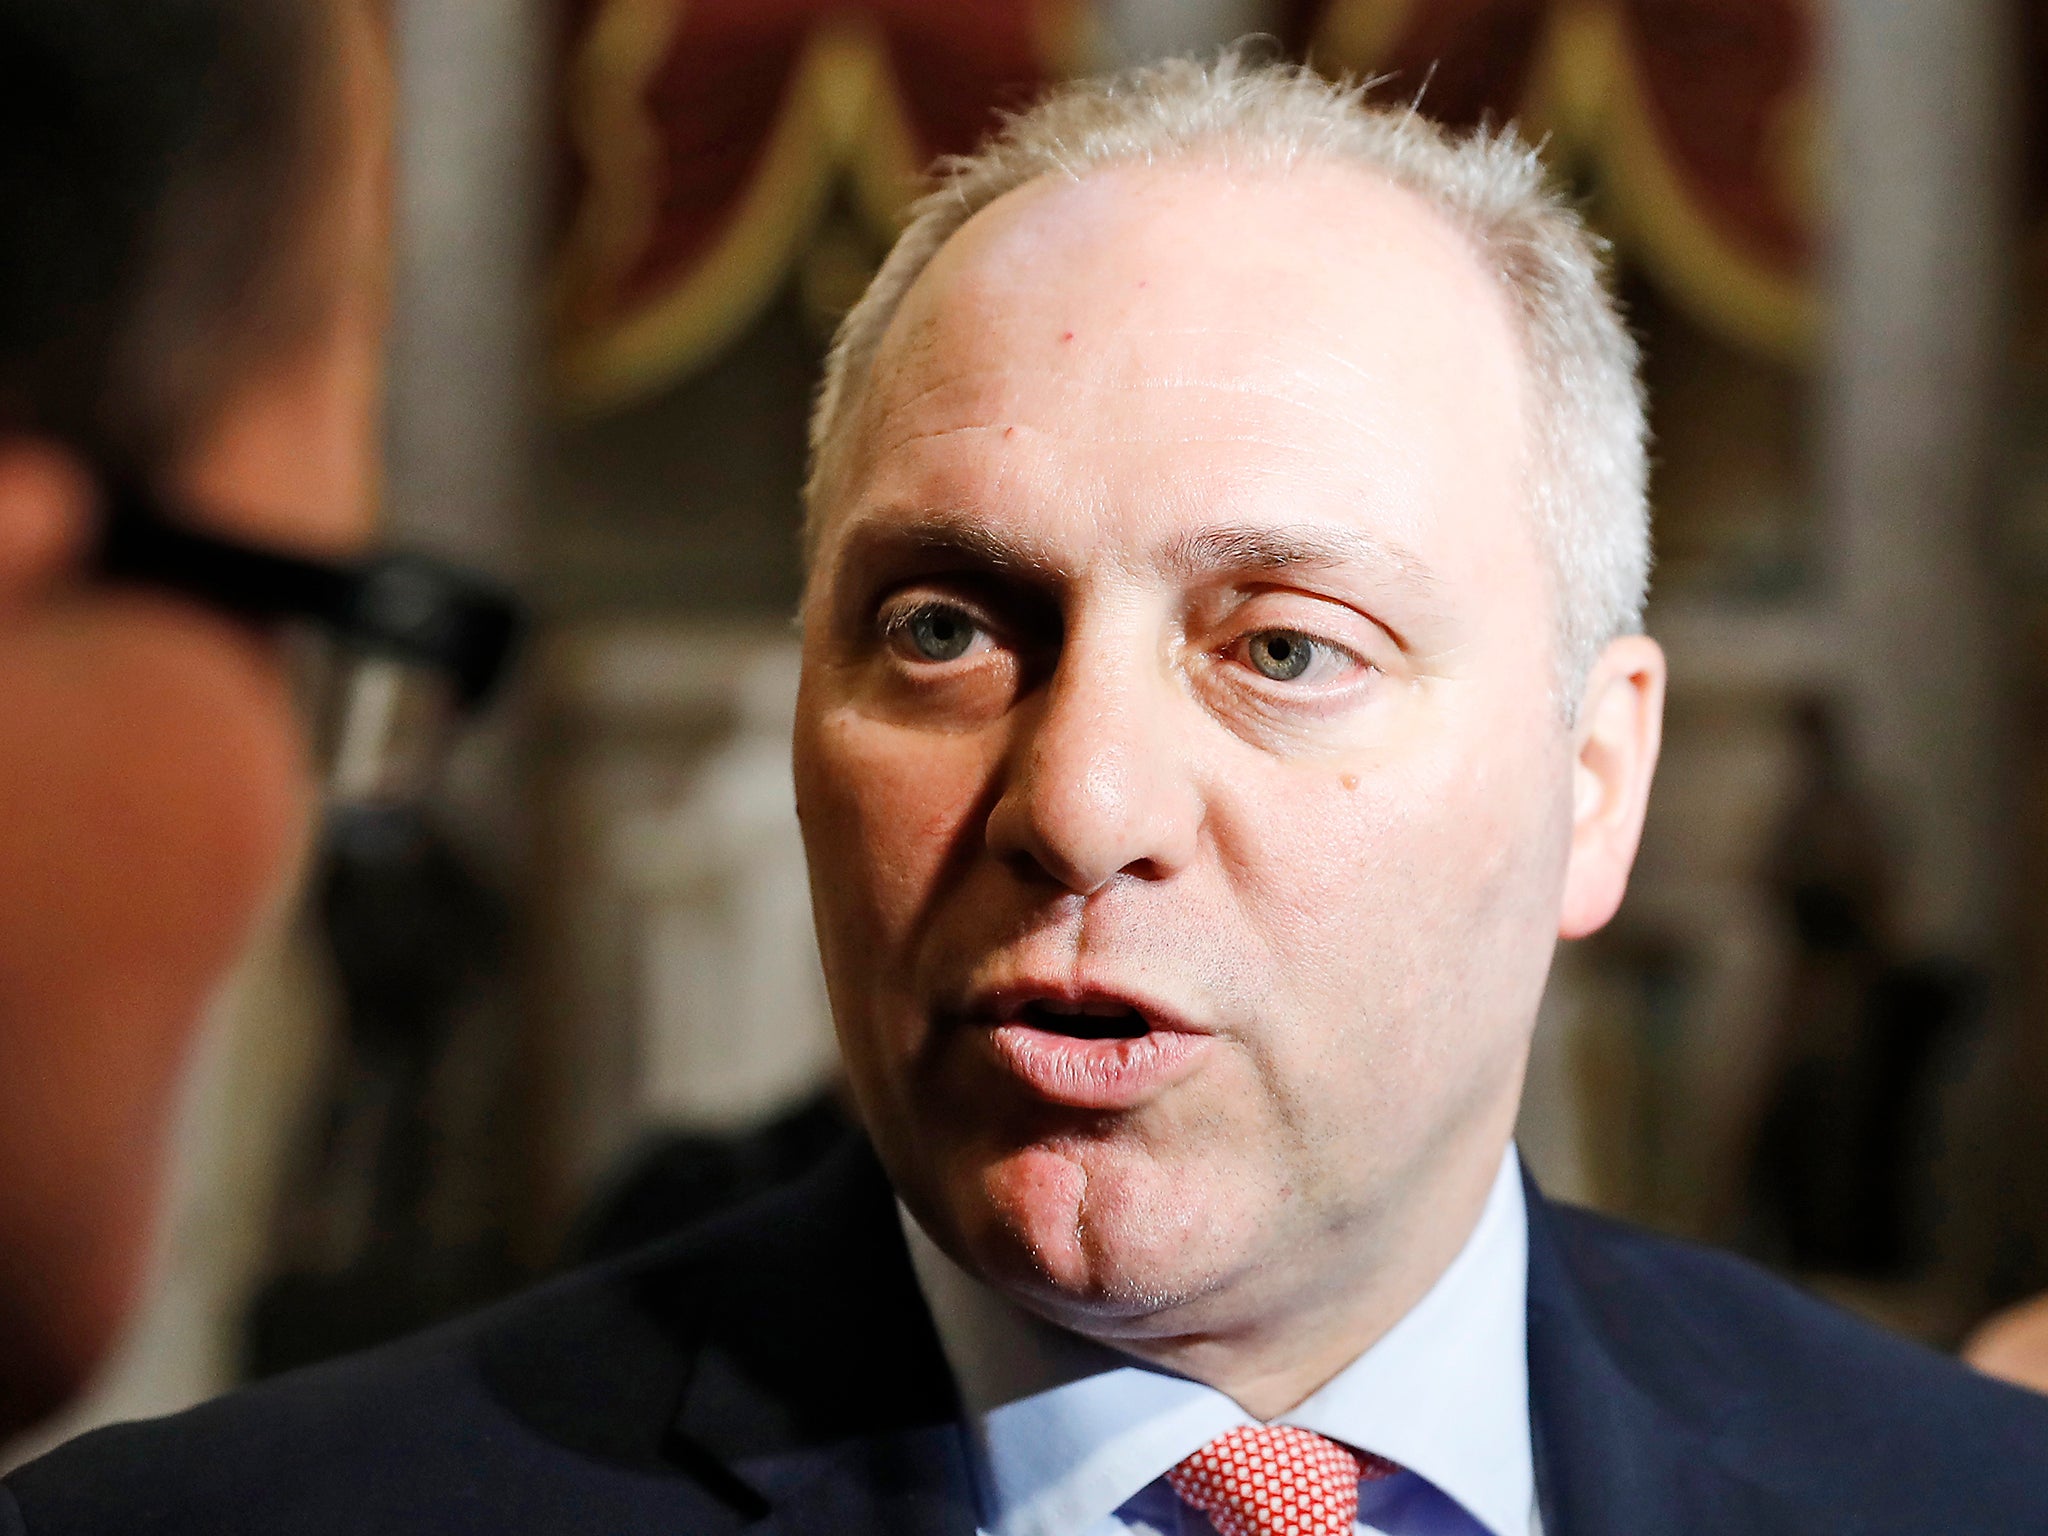 Steve Scalise has been a vocal supporter of Donald Trump